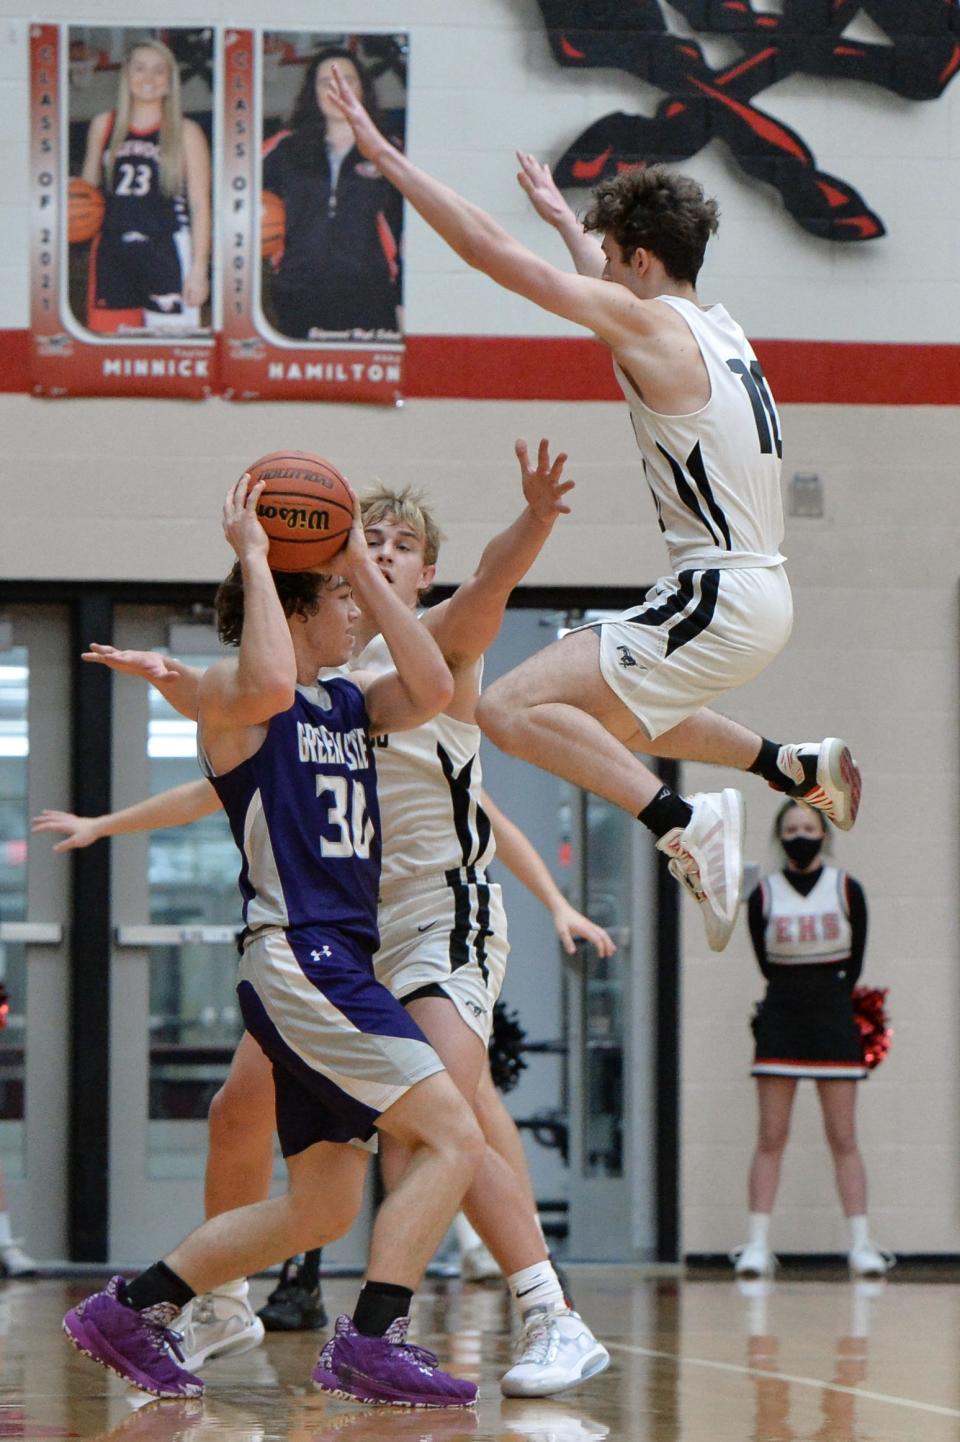 Edgewood’s Coleman Sater (5) and Caden Huttenlocker (in air) double-team Greencastle’s Nick Sutherlin (30) during their boys' basketball game in Ellettsville in December of 2020.